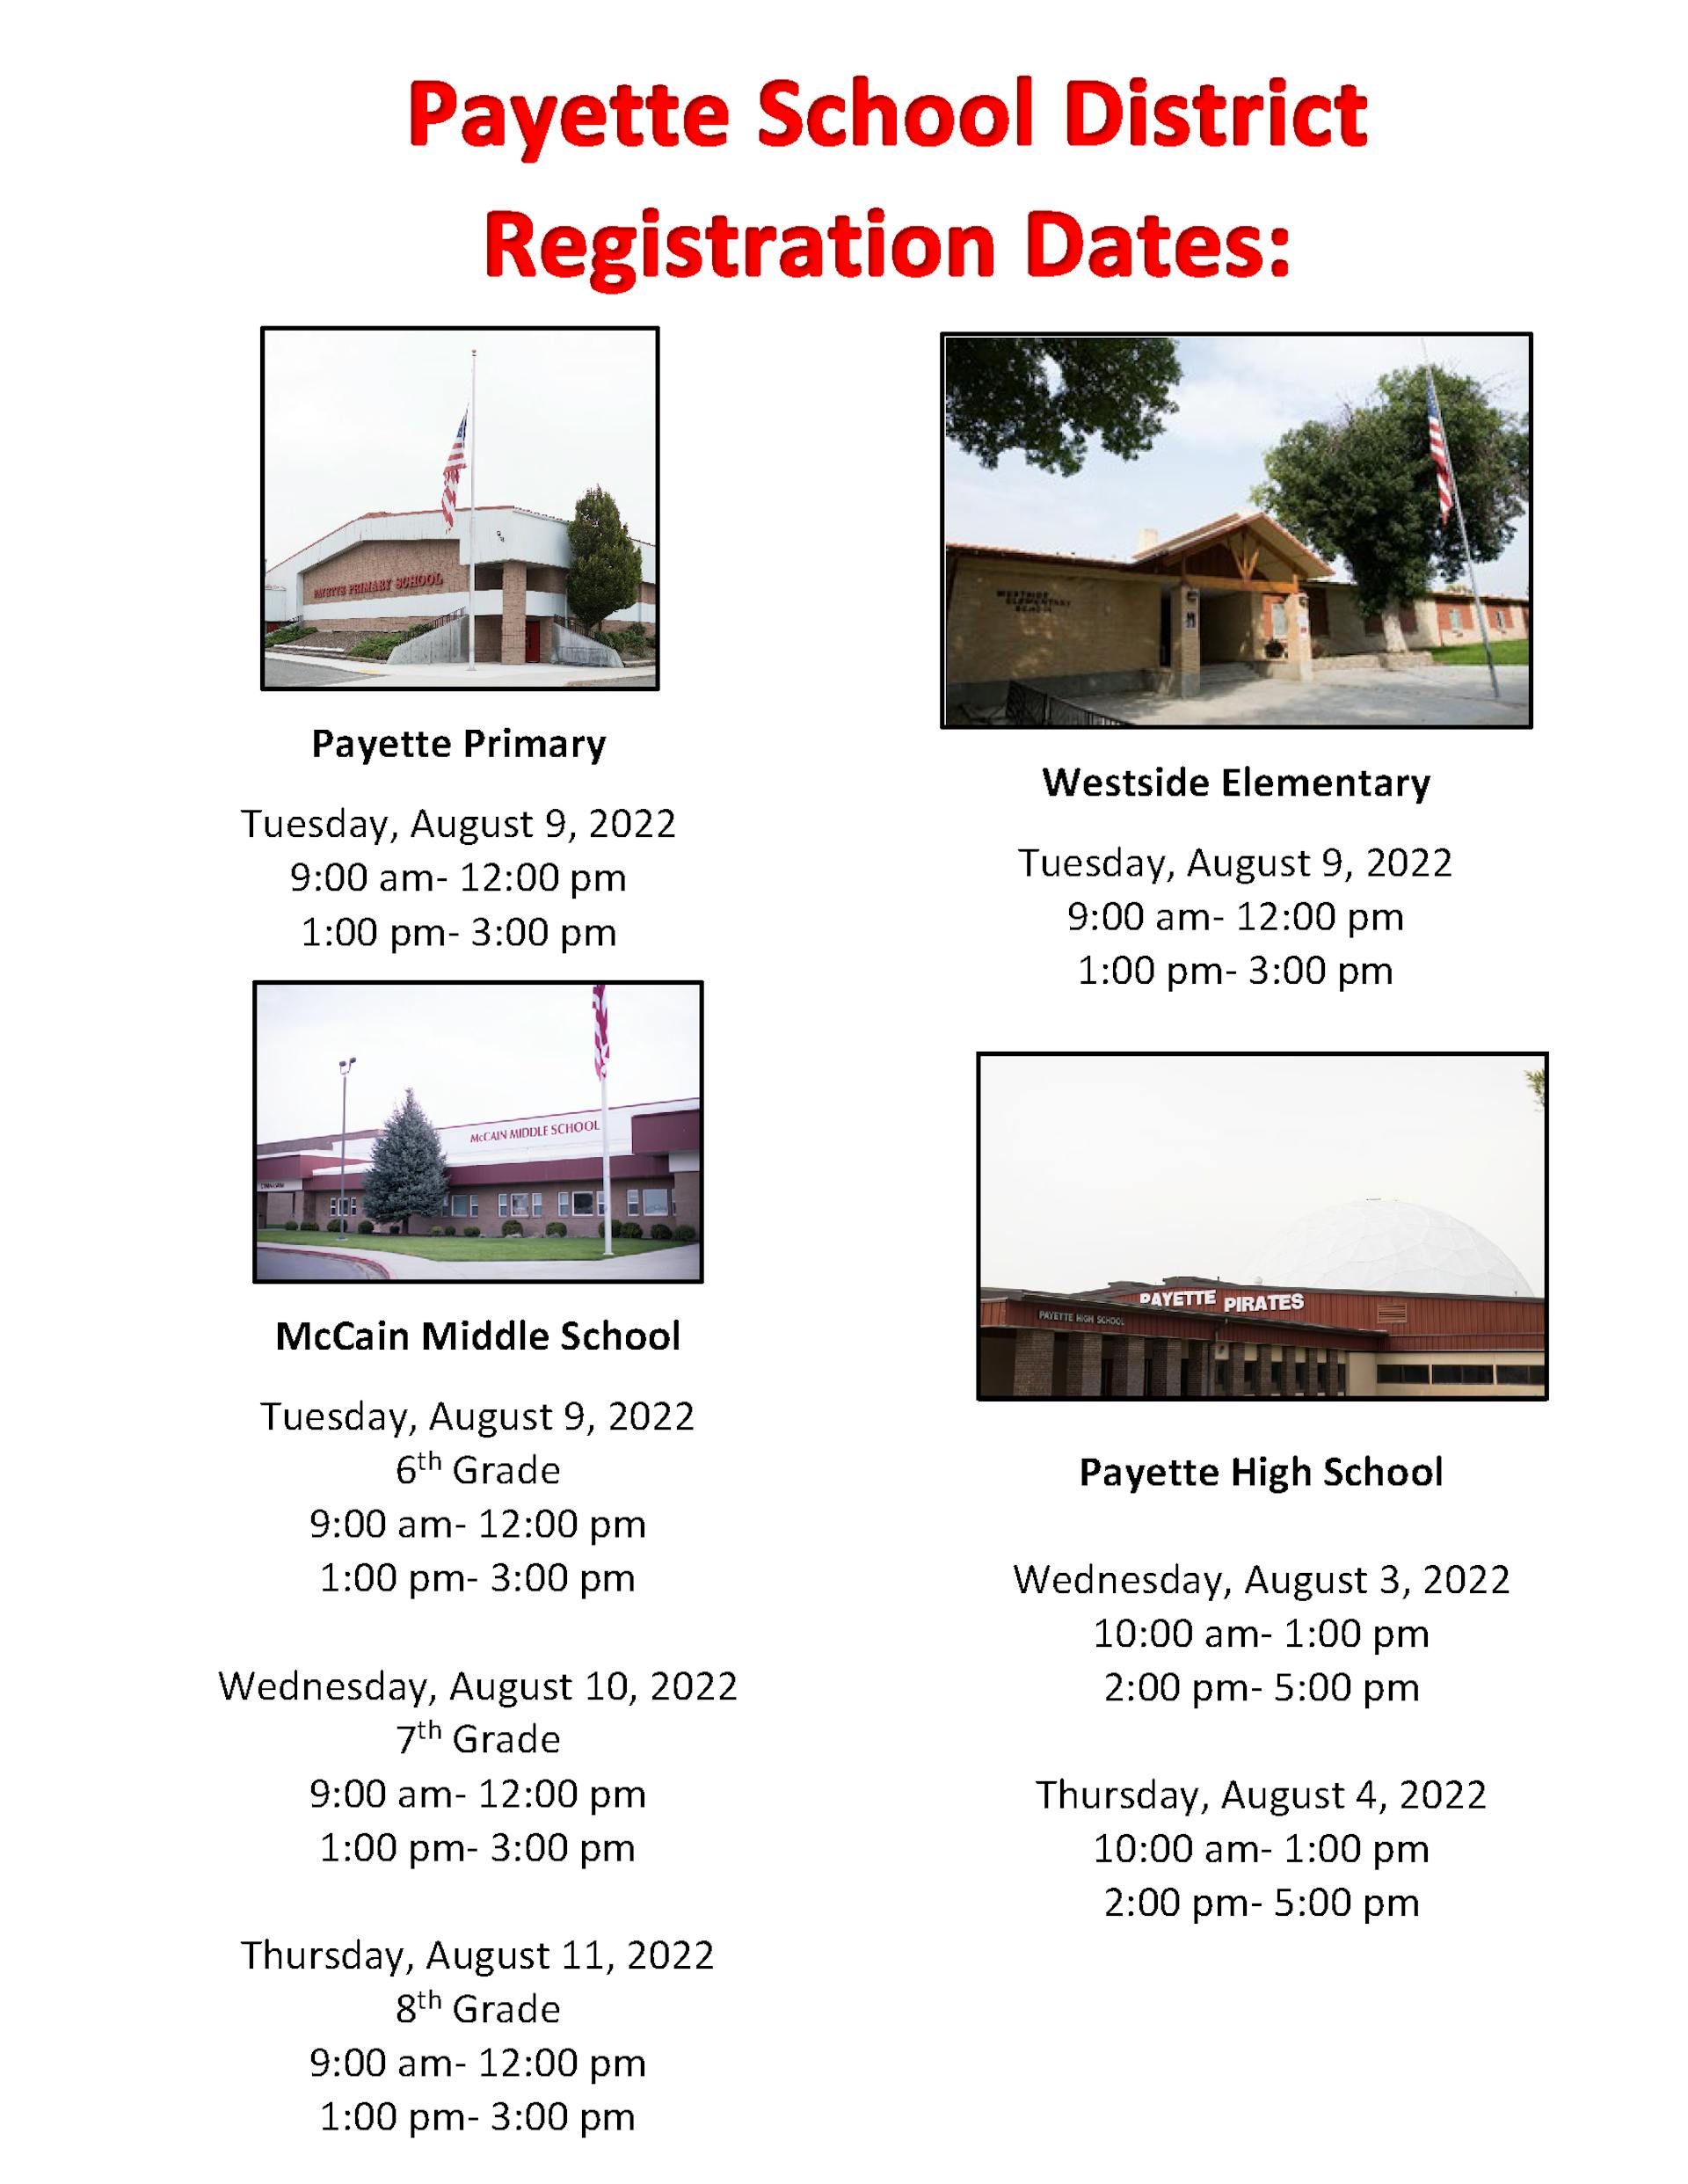  Registration dates and times for all schools in the district 